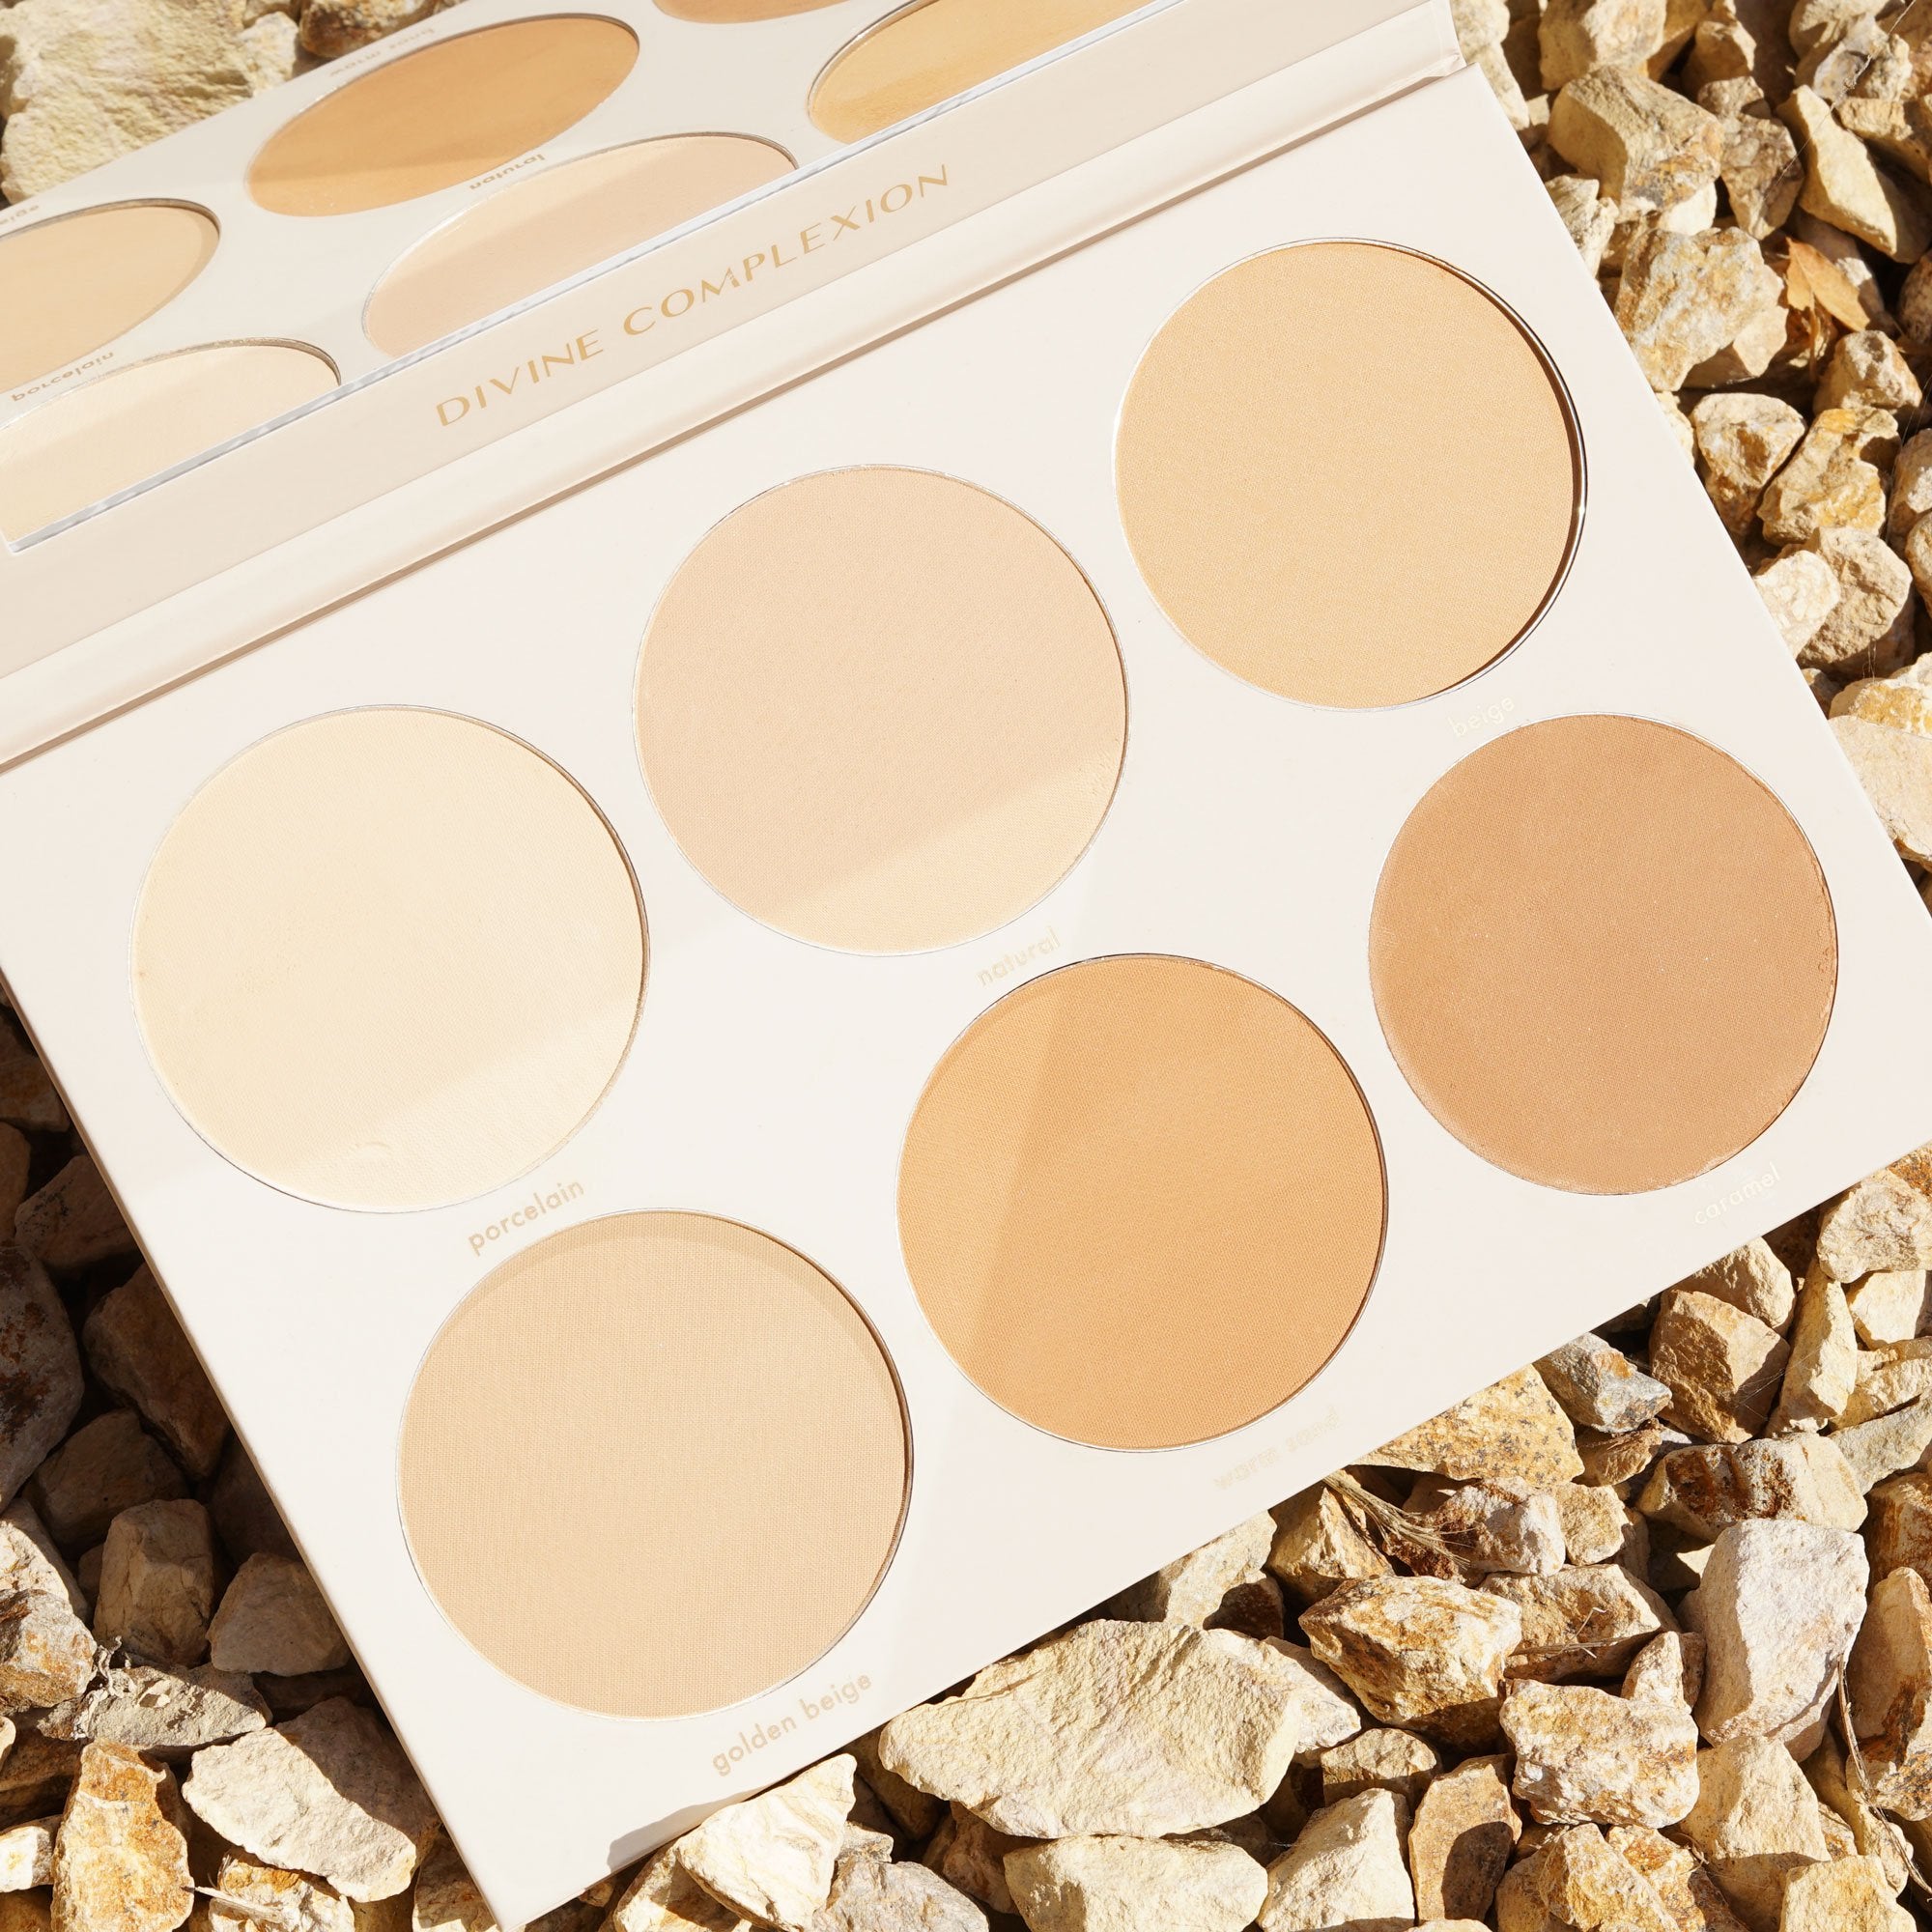 Divine complexion pressed finishing powder for face